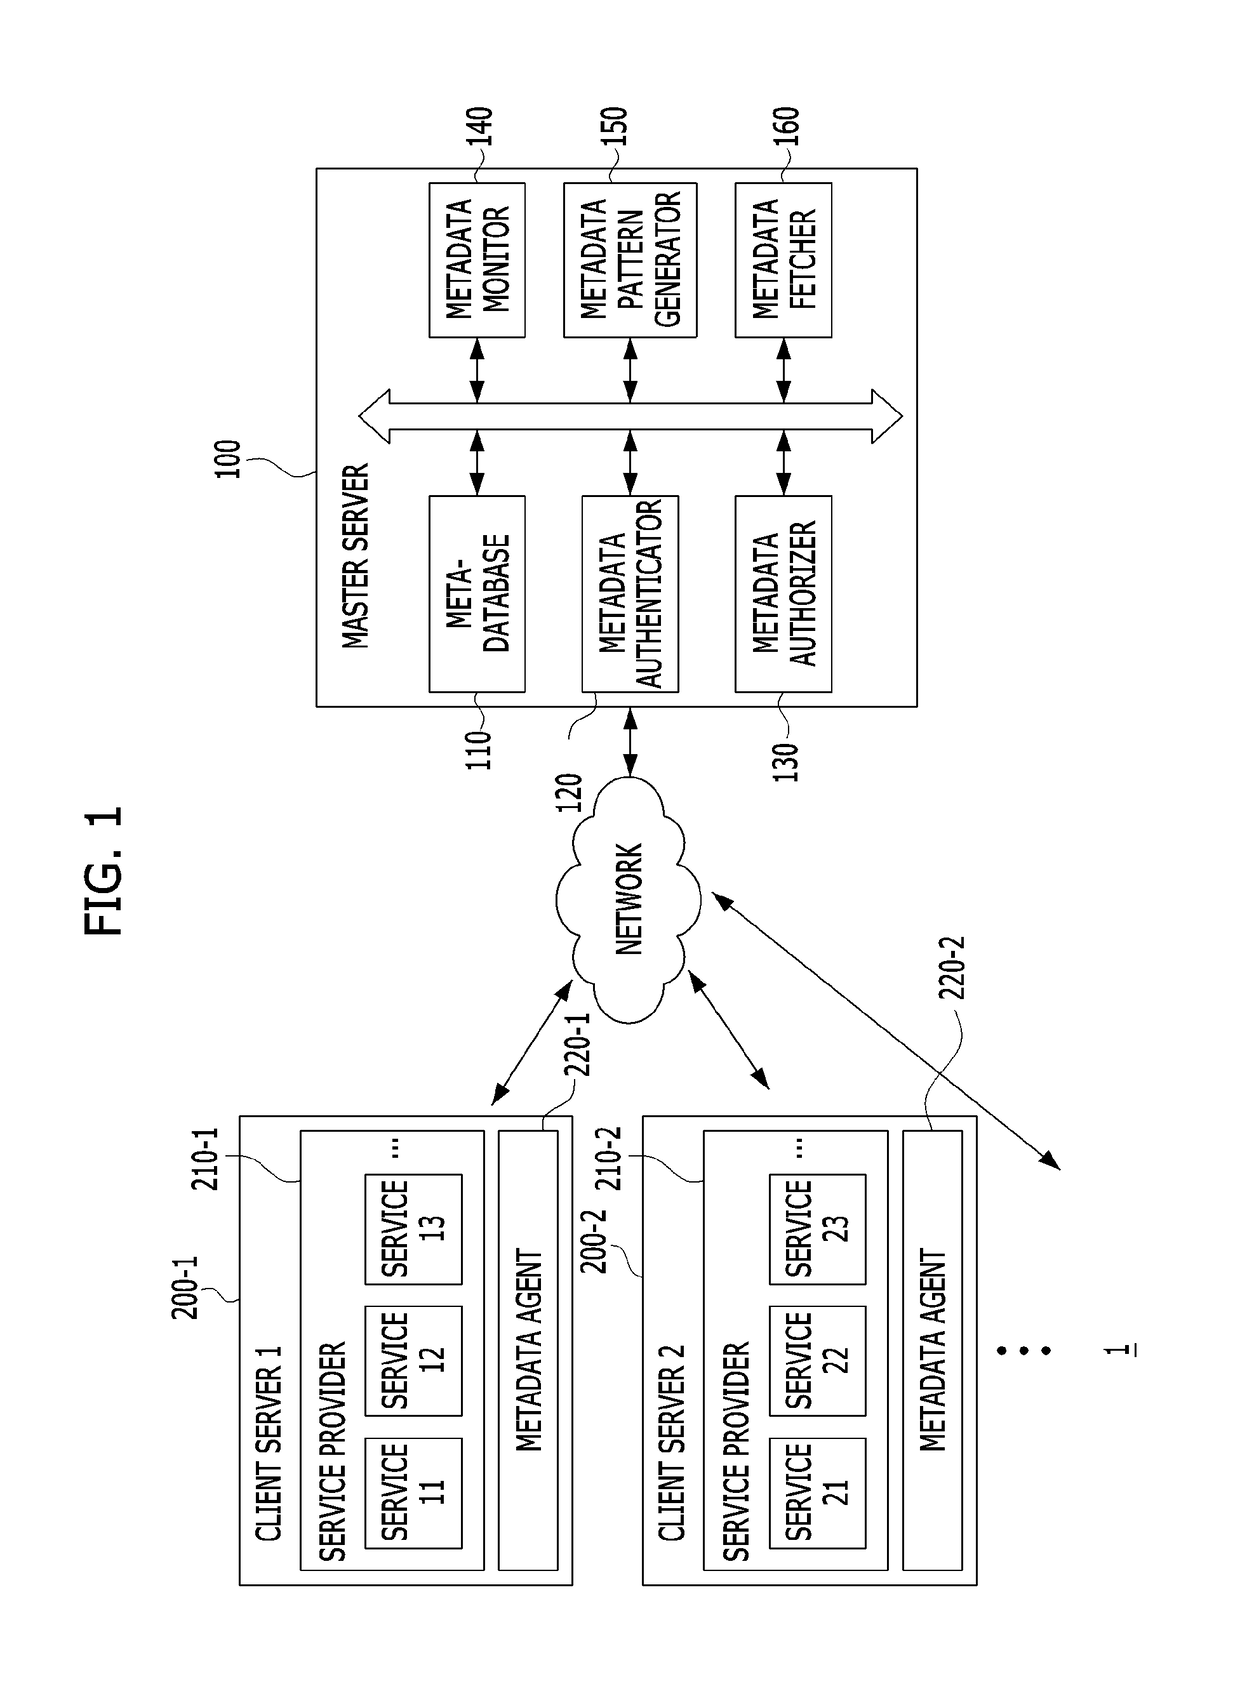 System and method for managing metadata